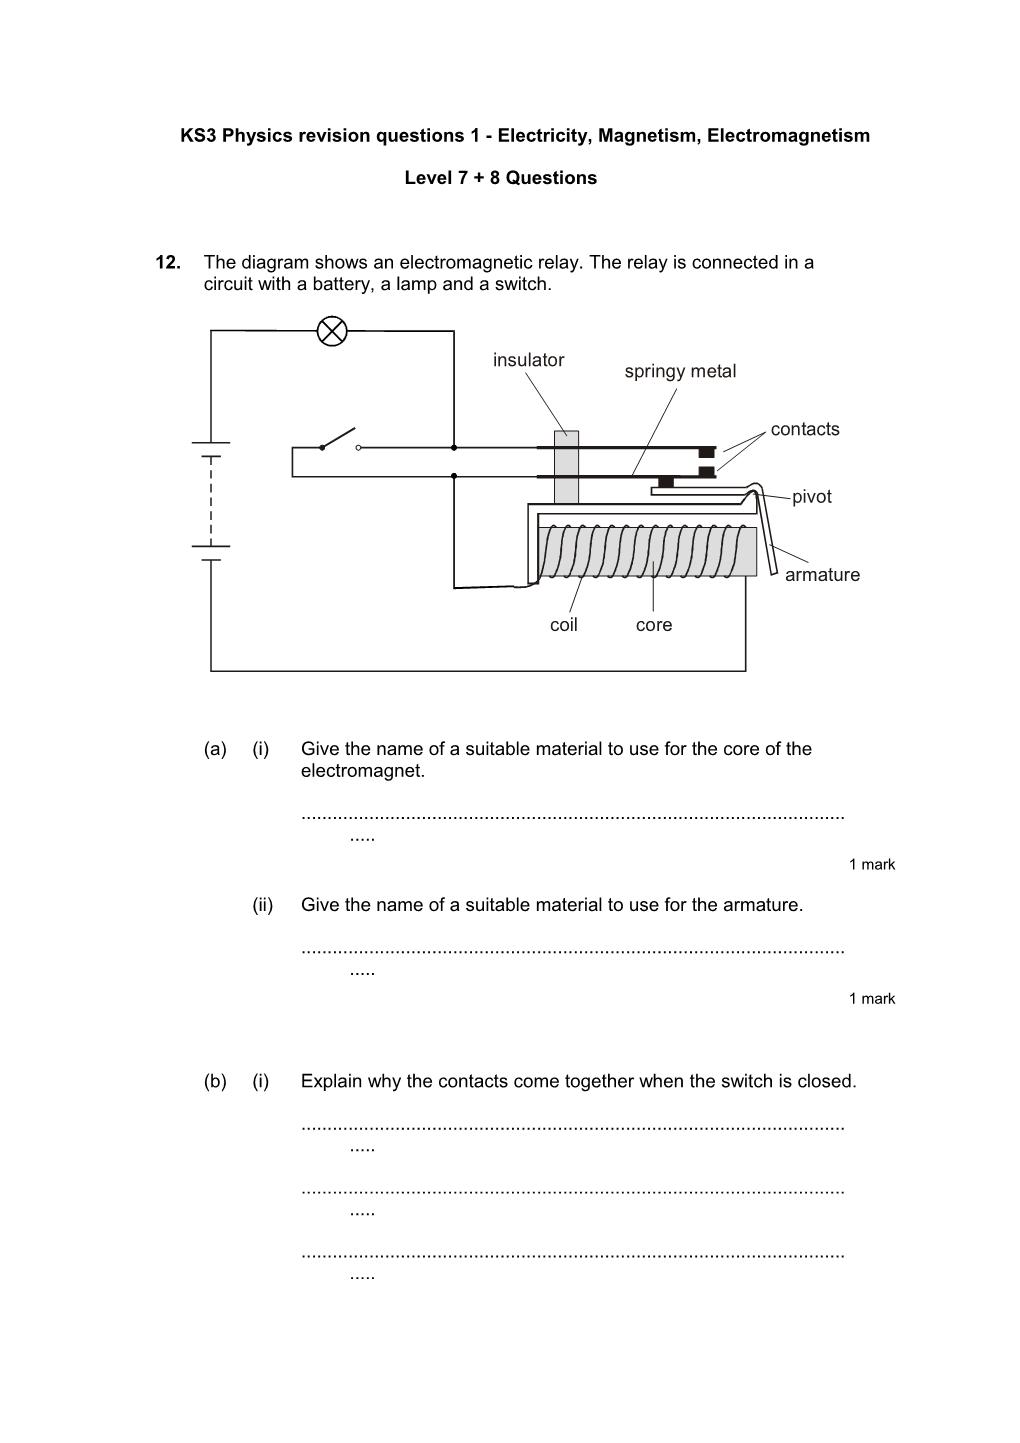 KS3 Physics Revision Questions 1 - Electricity, Magnetism, Electromagnetism